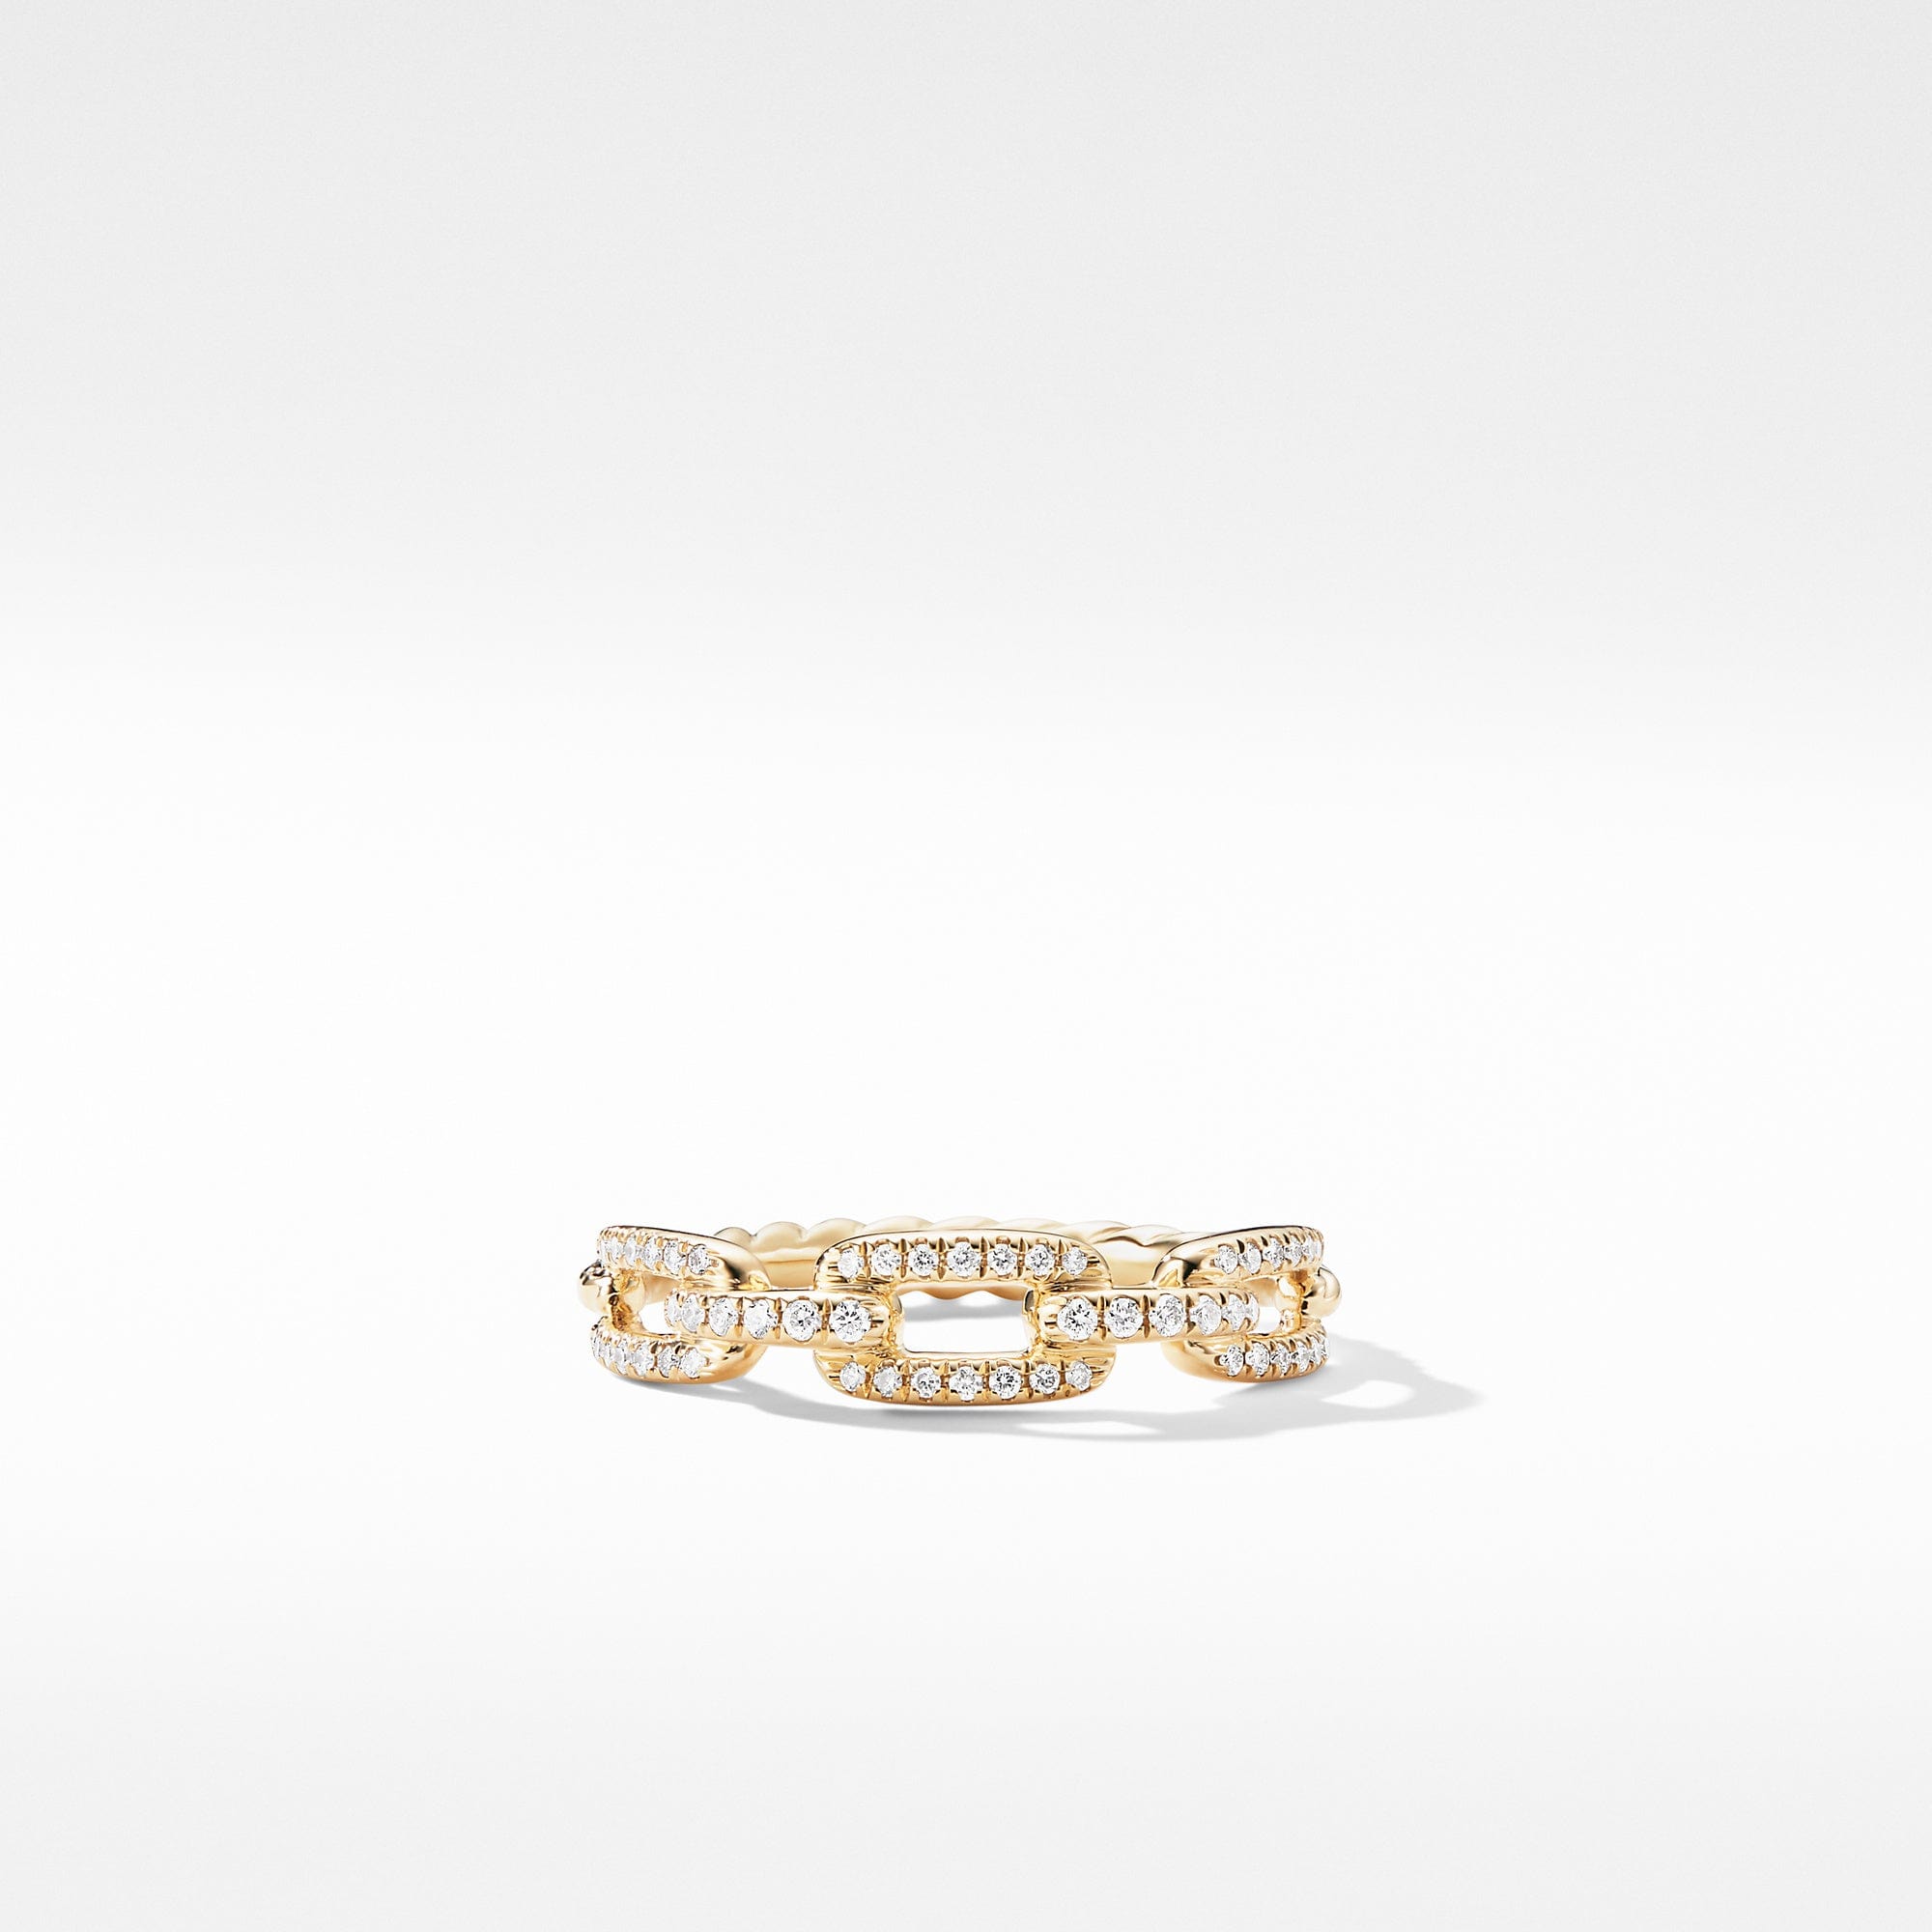 Stax Single Row Pave Chain Link Ring with Diamonds in 18K Gold, 4.5mm, Long's Jewelers